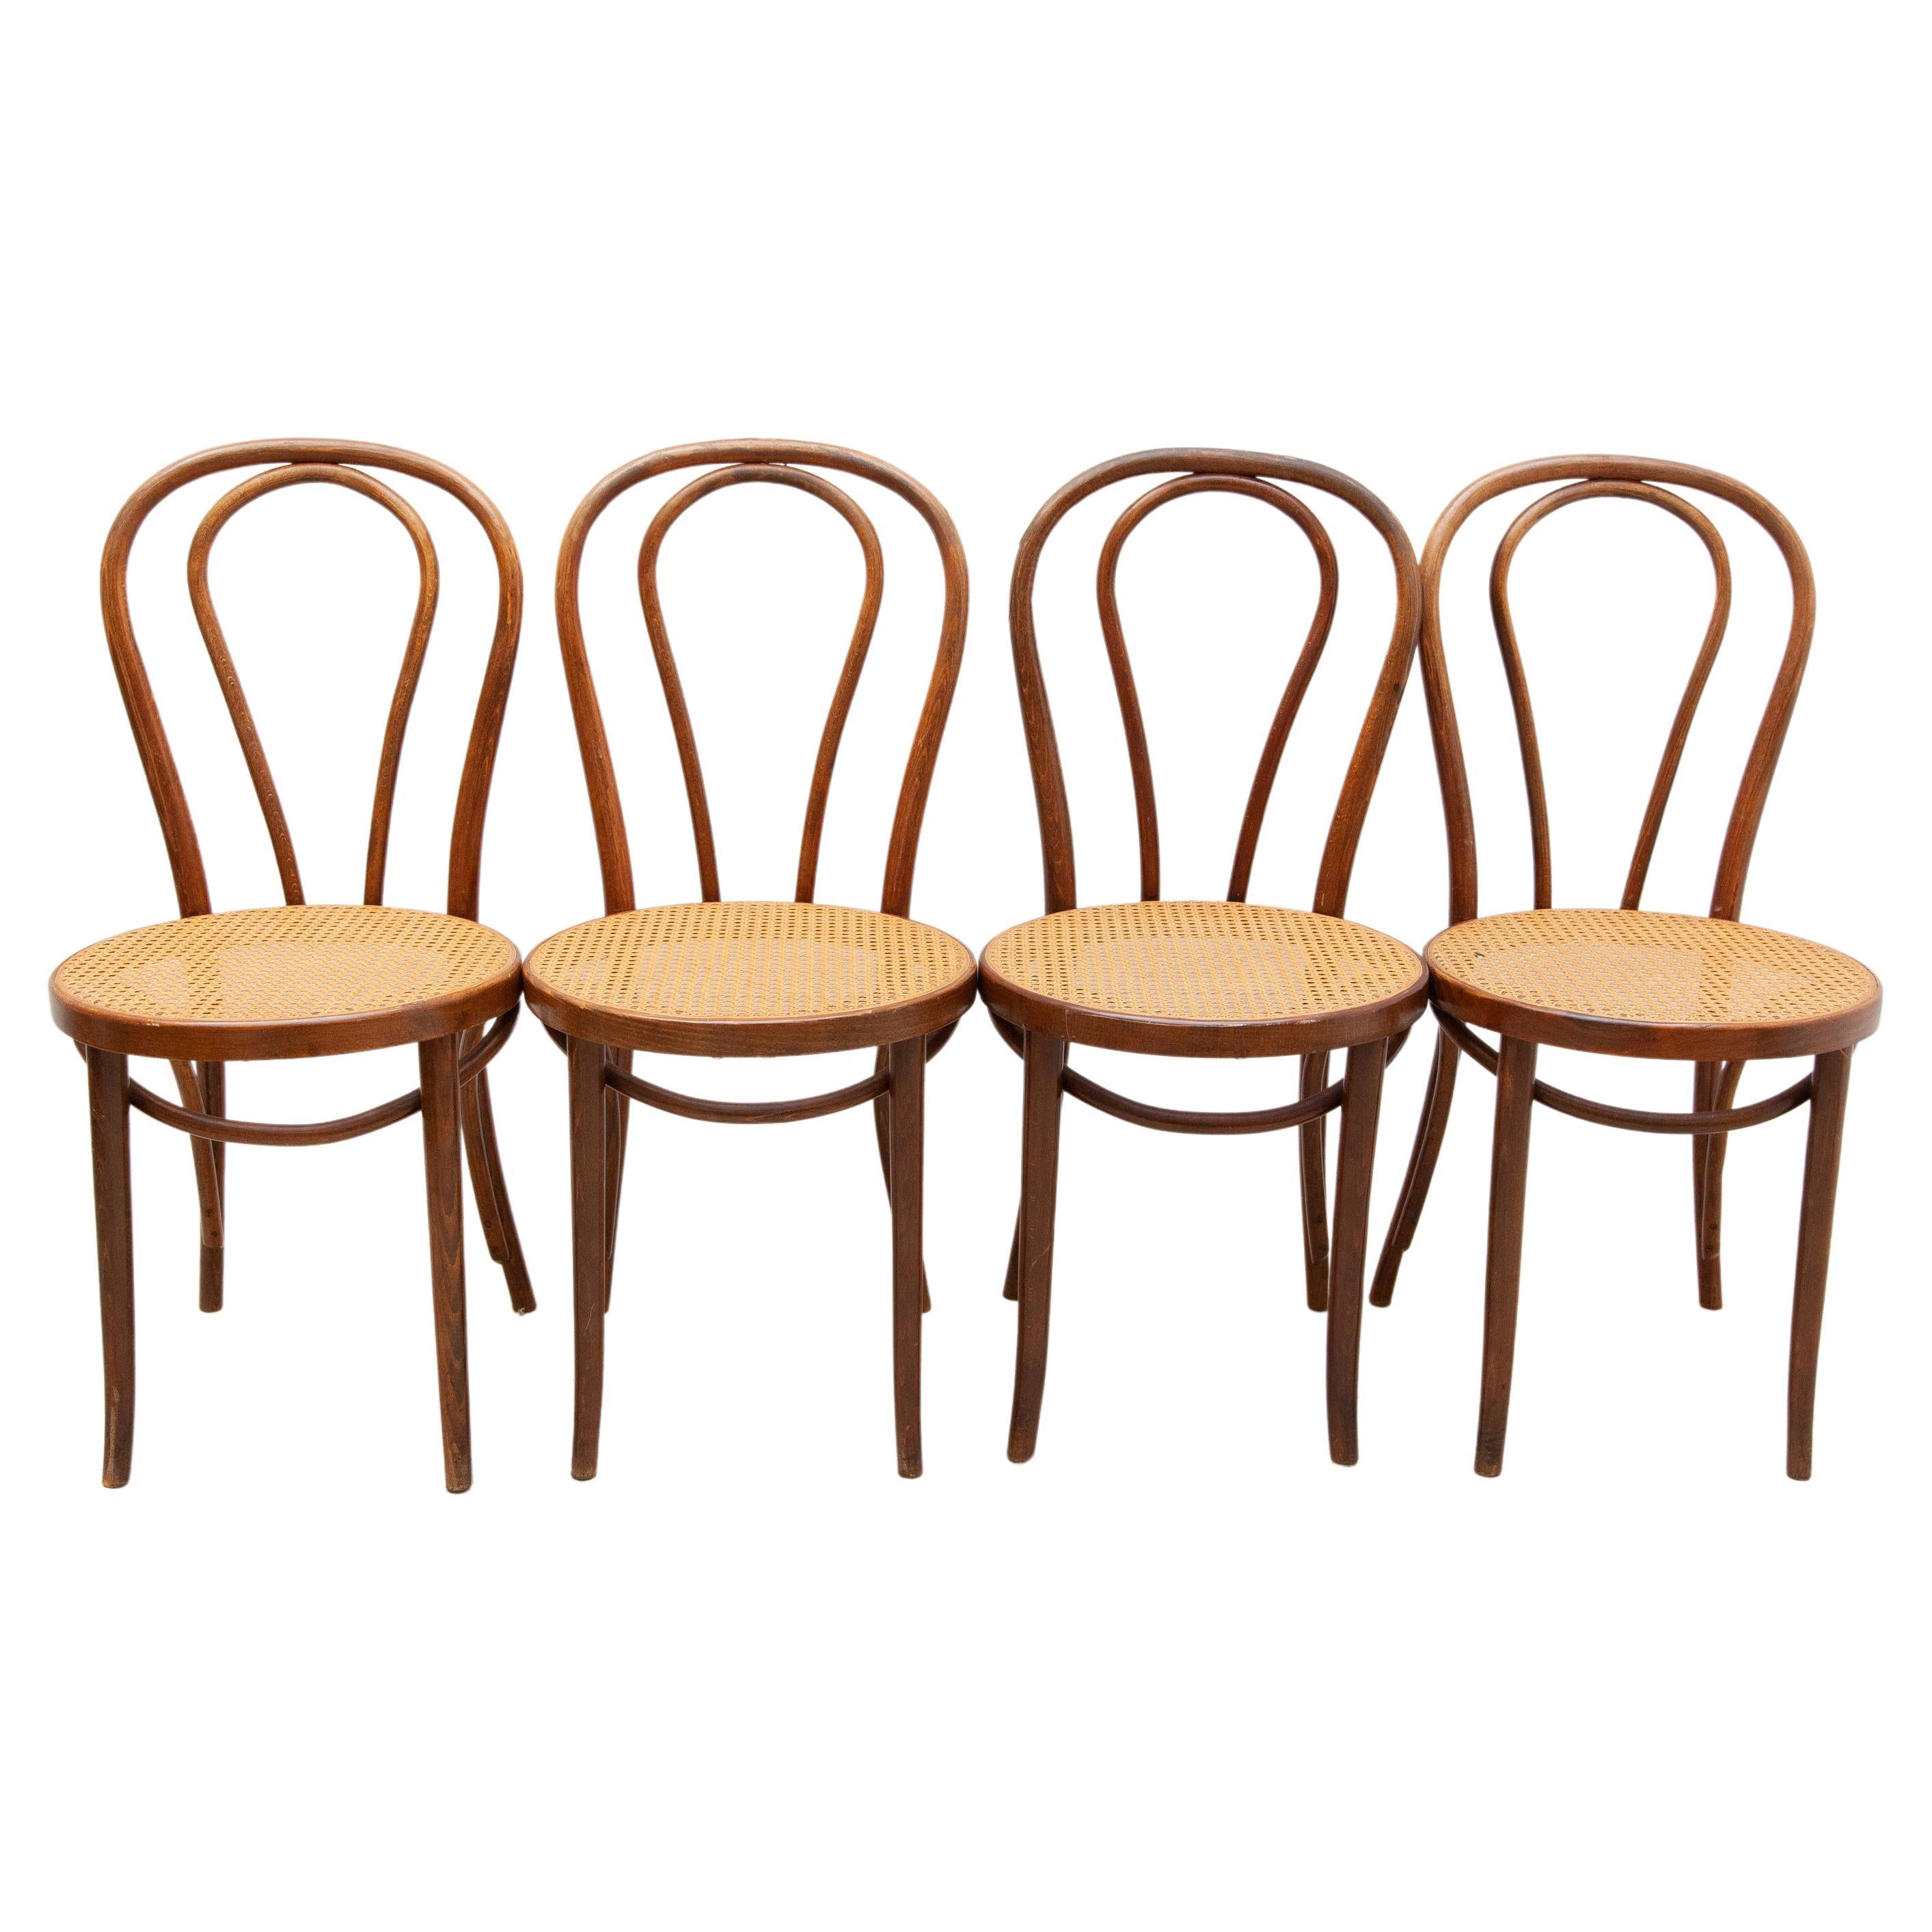 Dining Chairs by Michael Thonet, 1920s Set of Four